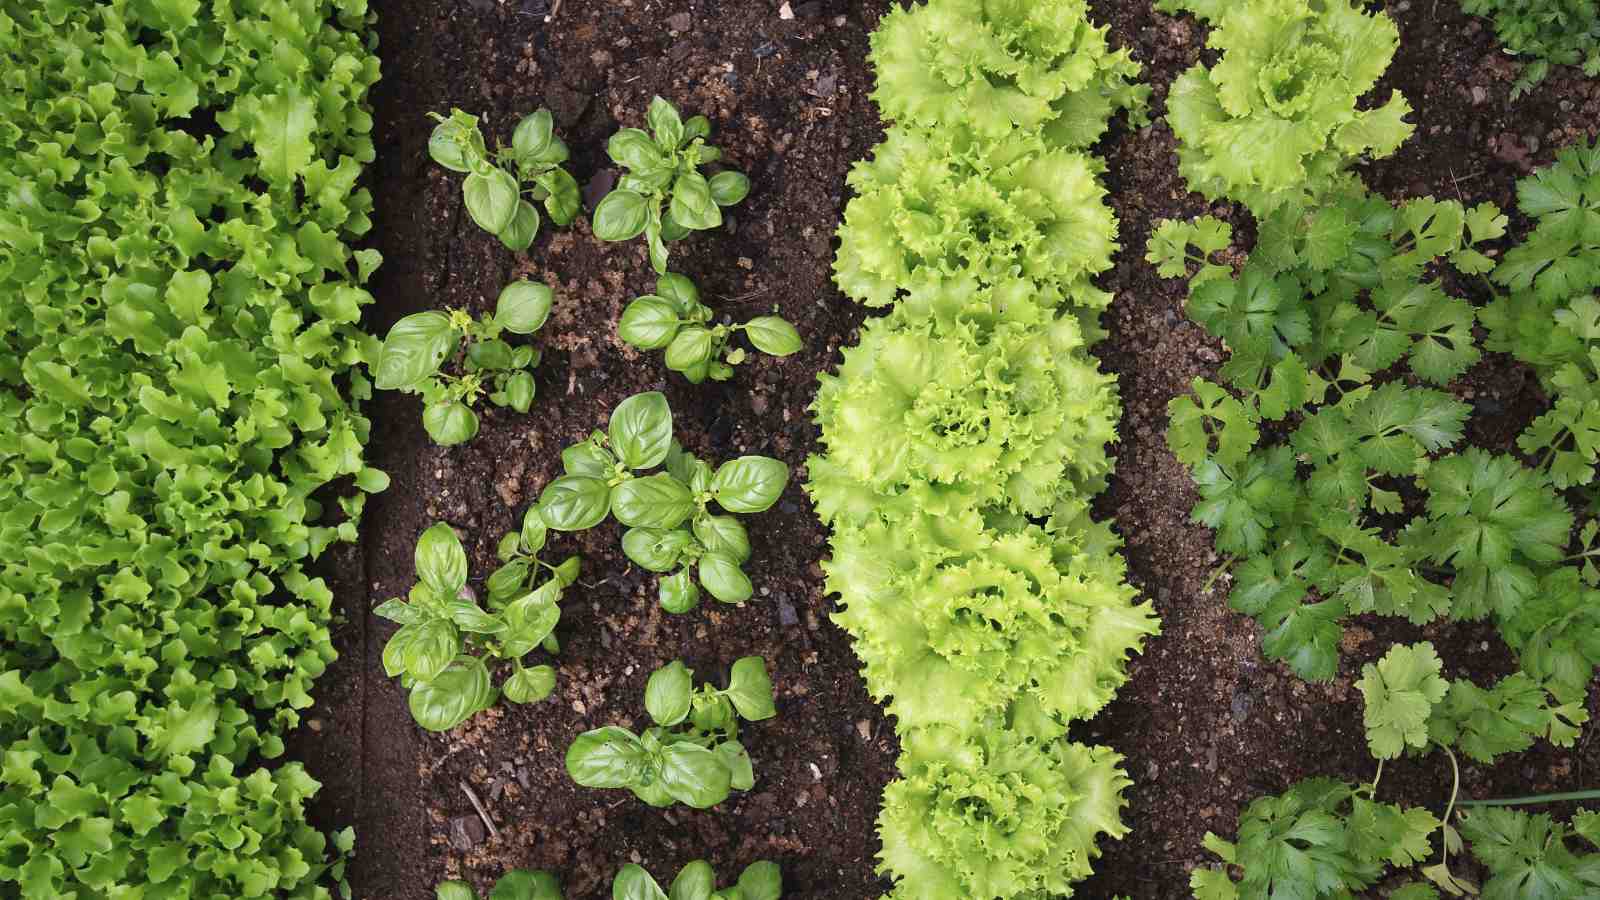 Rows of lettuces in a vegetable garden